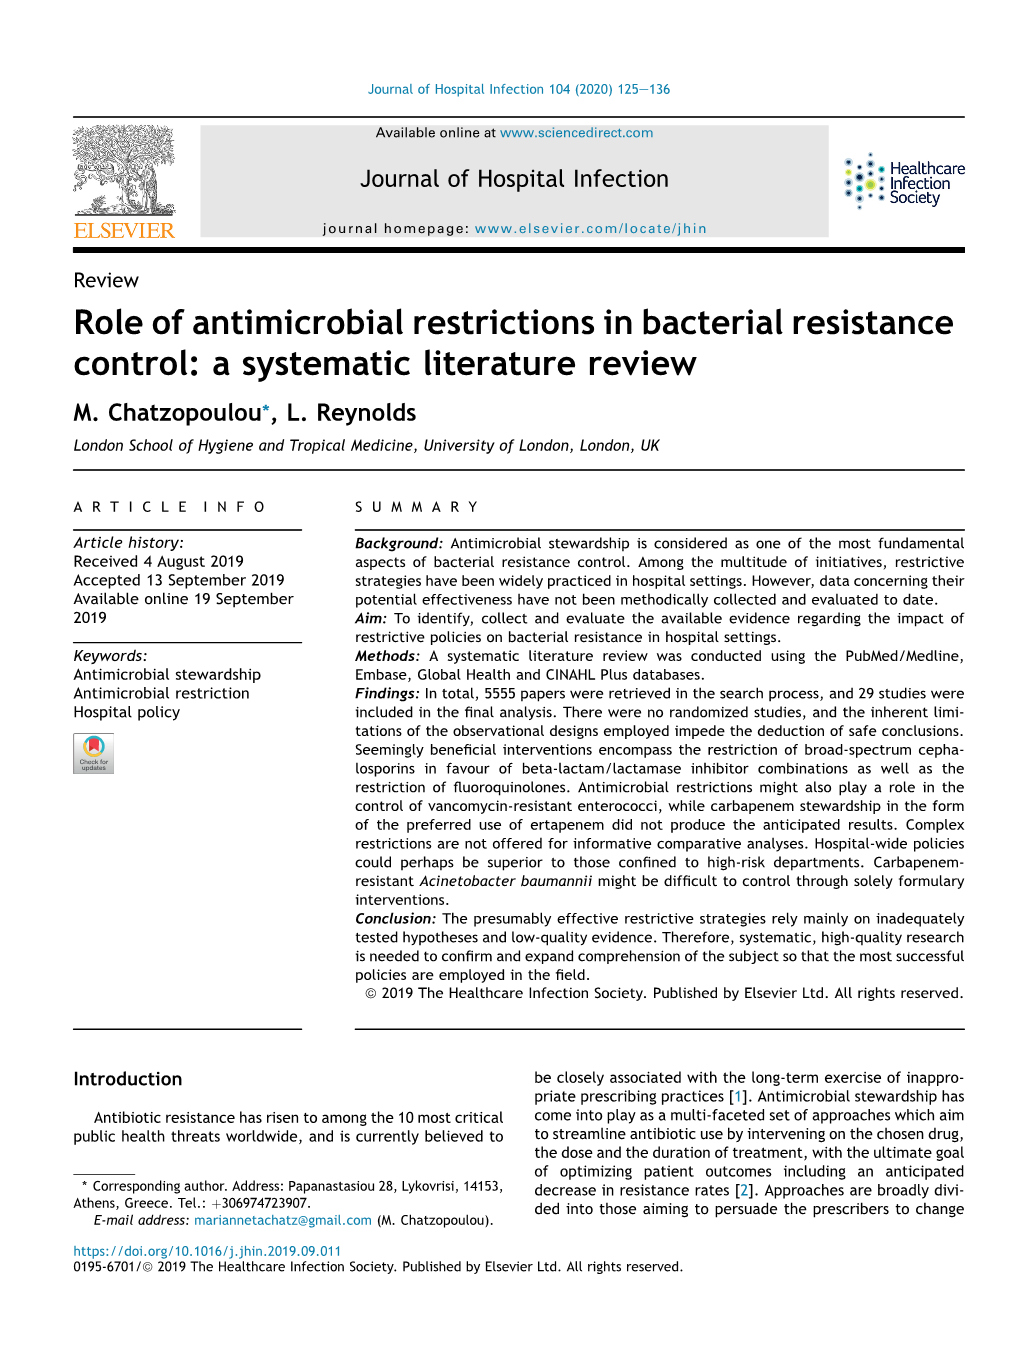 Role of Antimicrobial Restrictions in Bacterial Resistance Control: a Systematic Literature Review